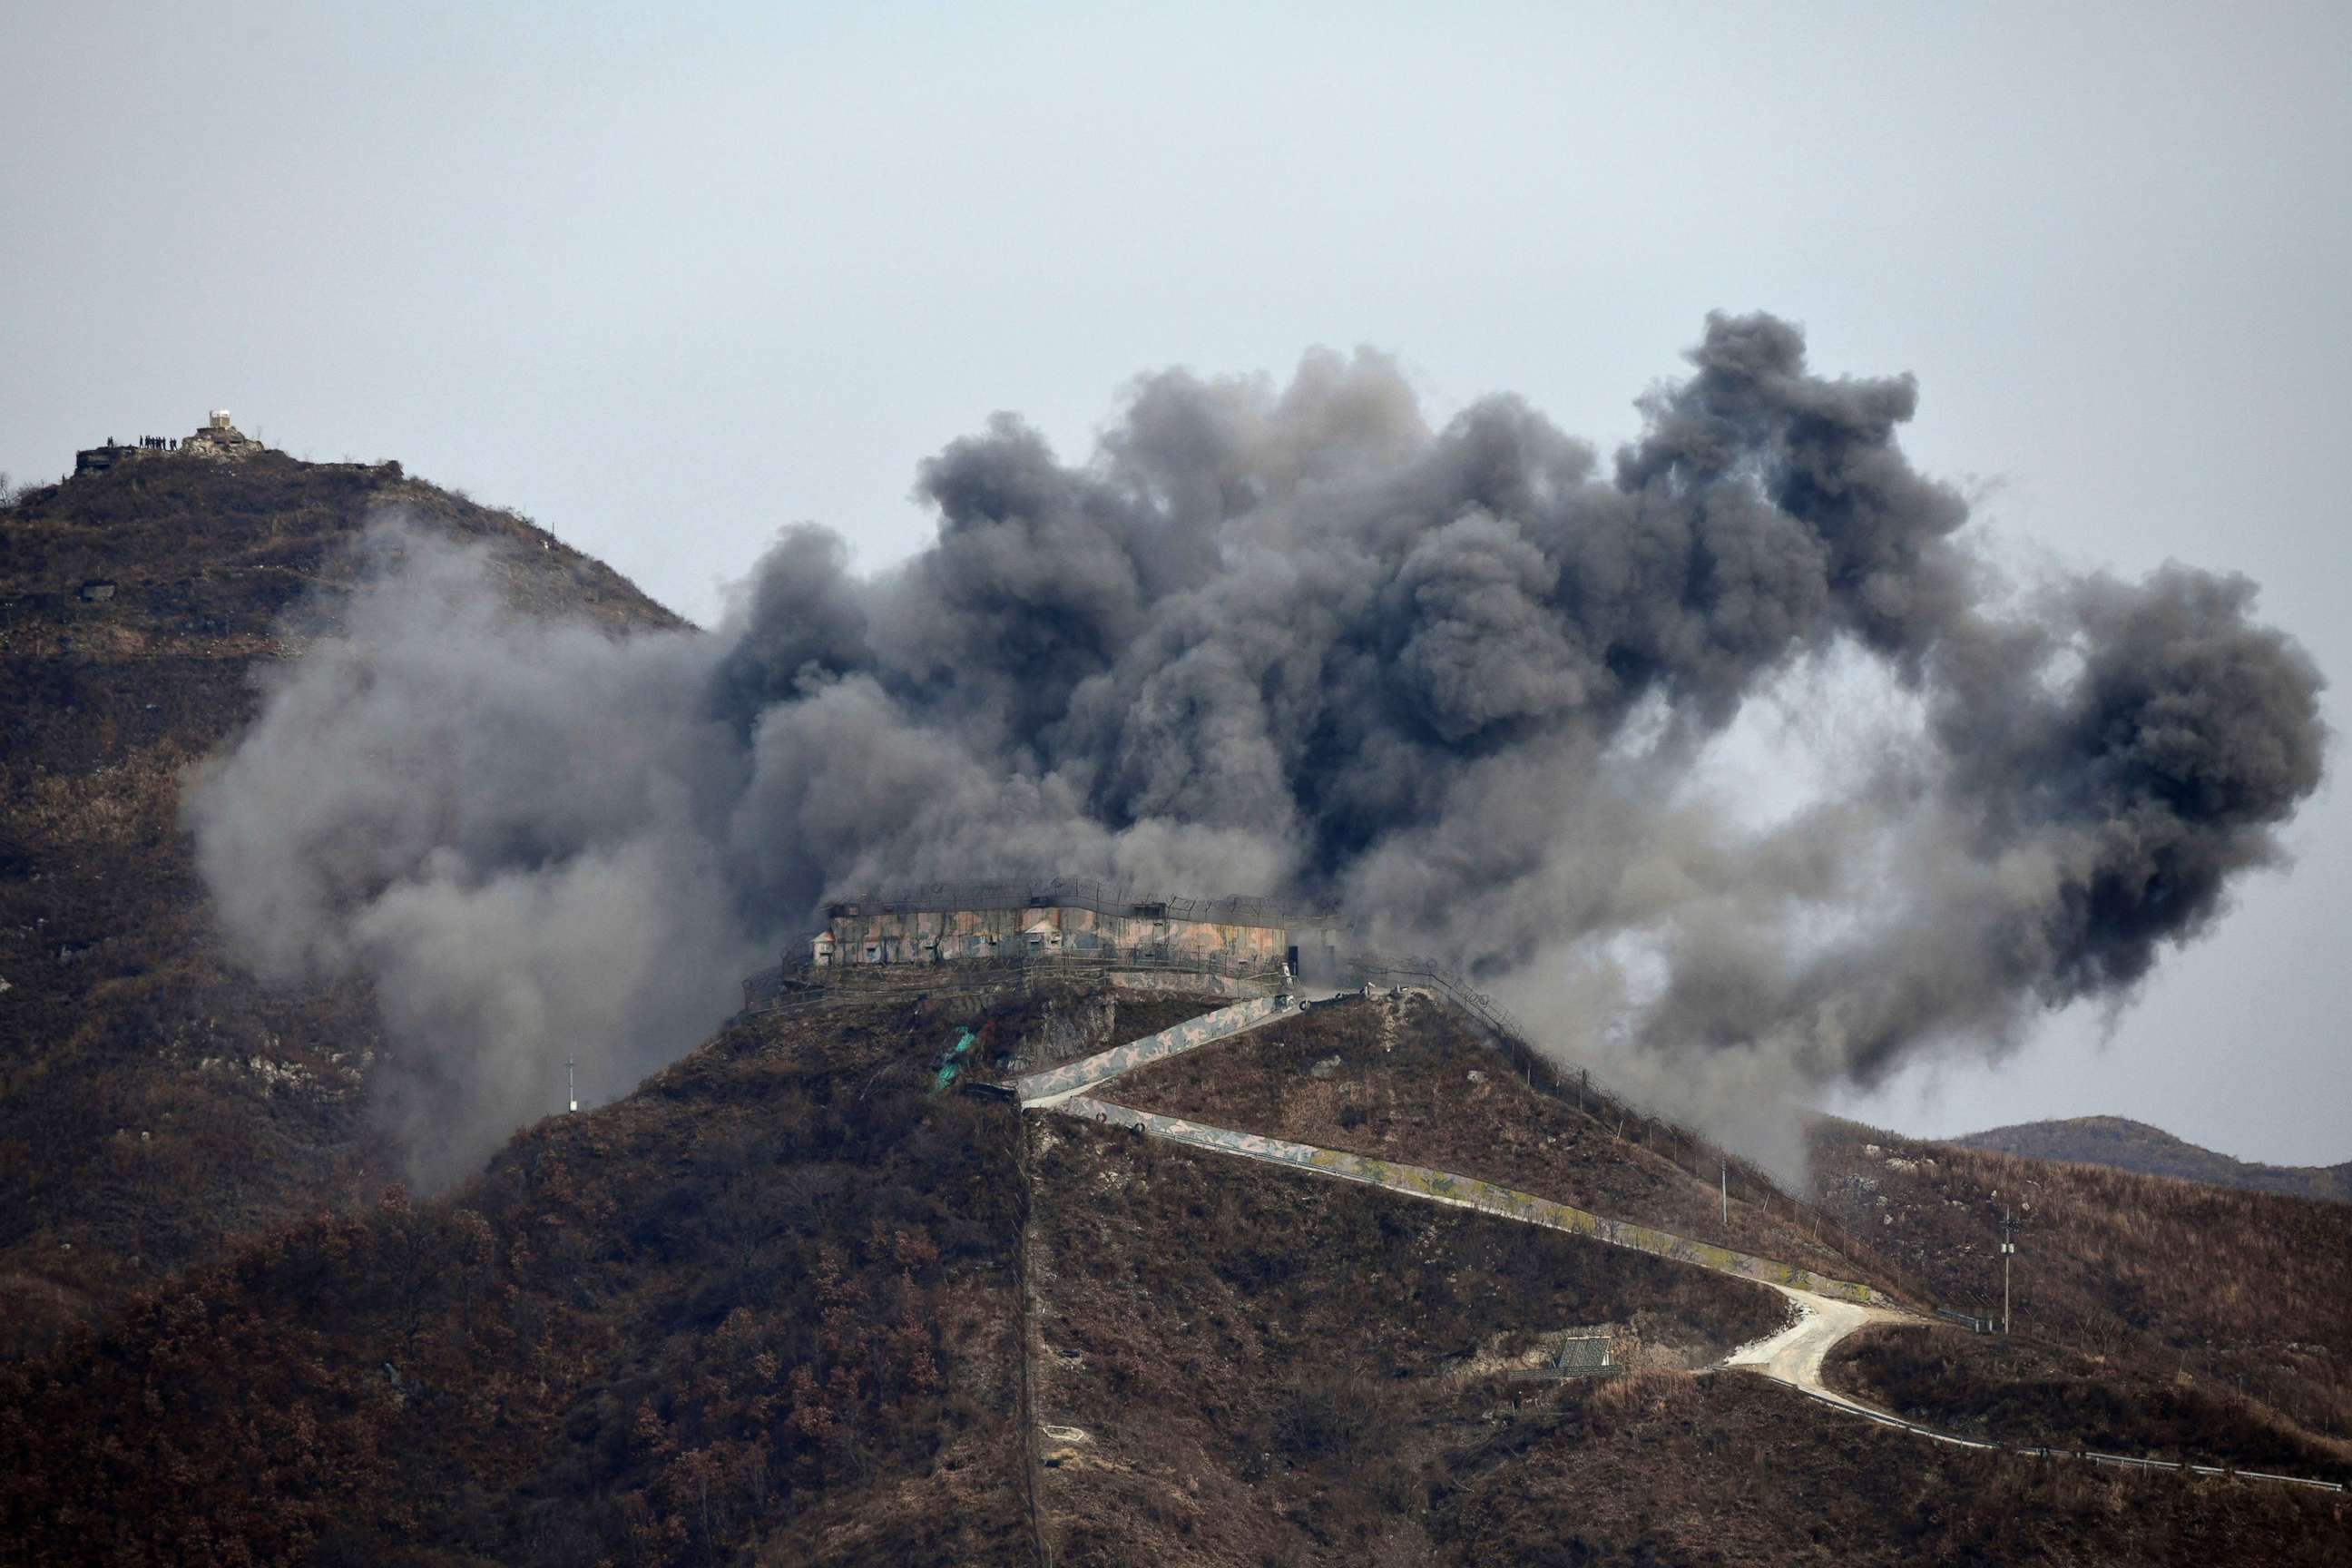 PHOTO: Smoke and debris from an explosion rises as part of the dismantling of a South Korean guard post, Nov. 15, 2018, in the Demilitarized Zone dividing the two Koreas in Cheorwon, as a North Korean guard post sits high in the upper left.